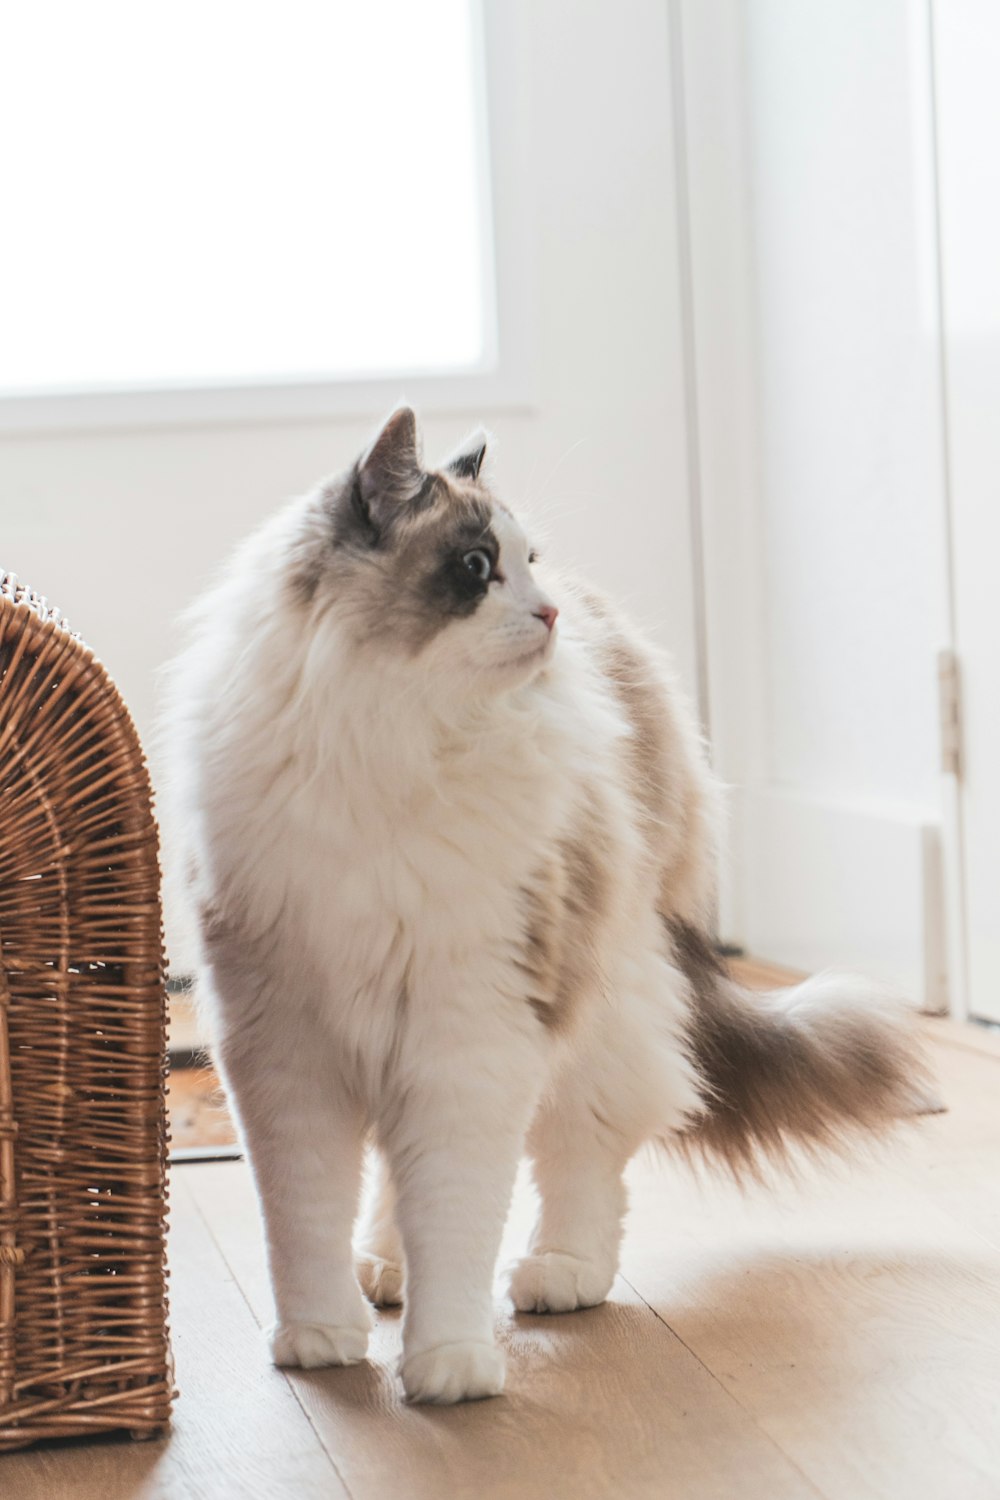 a cat standing on a wooden floor next to a basket